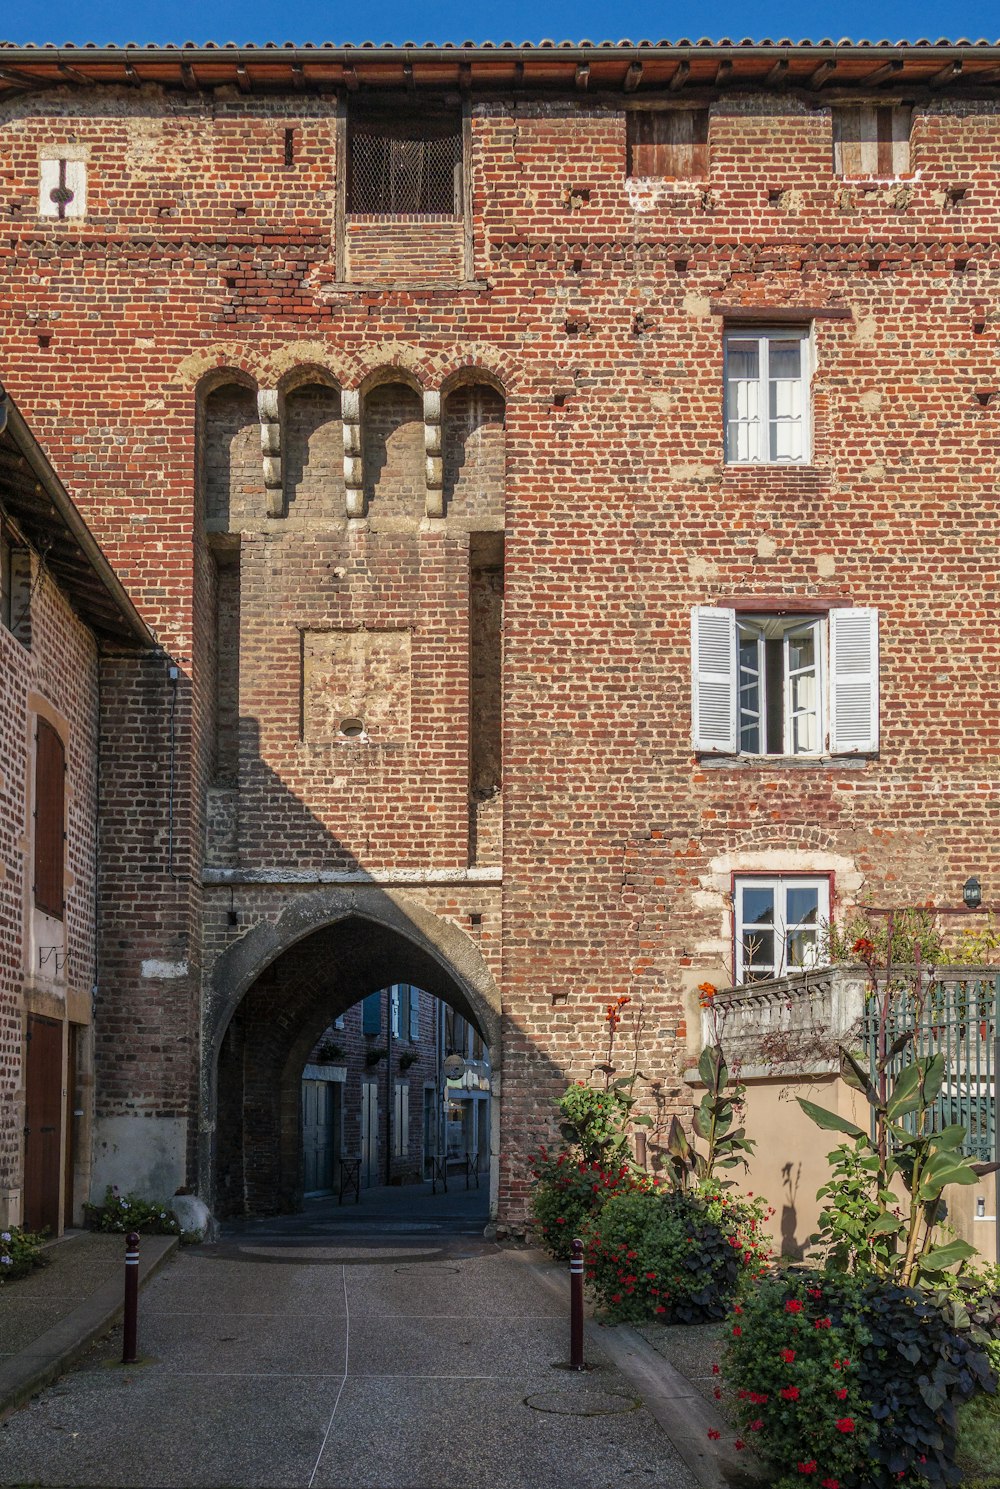 a brick building with a large arched doorway